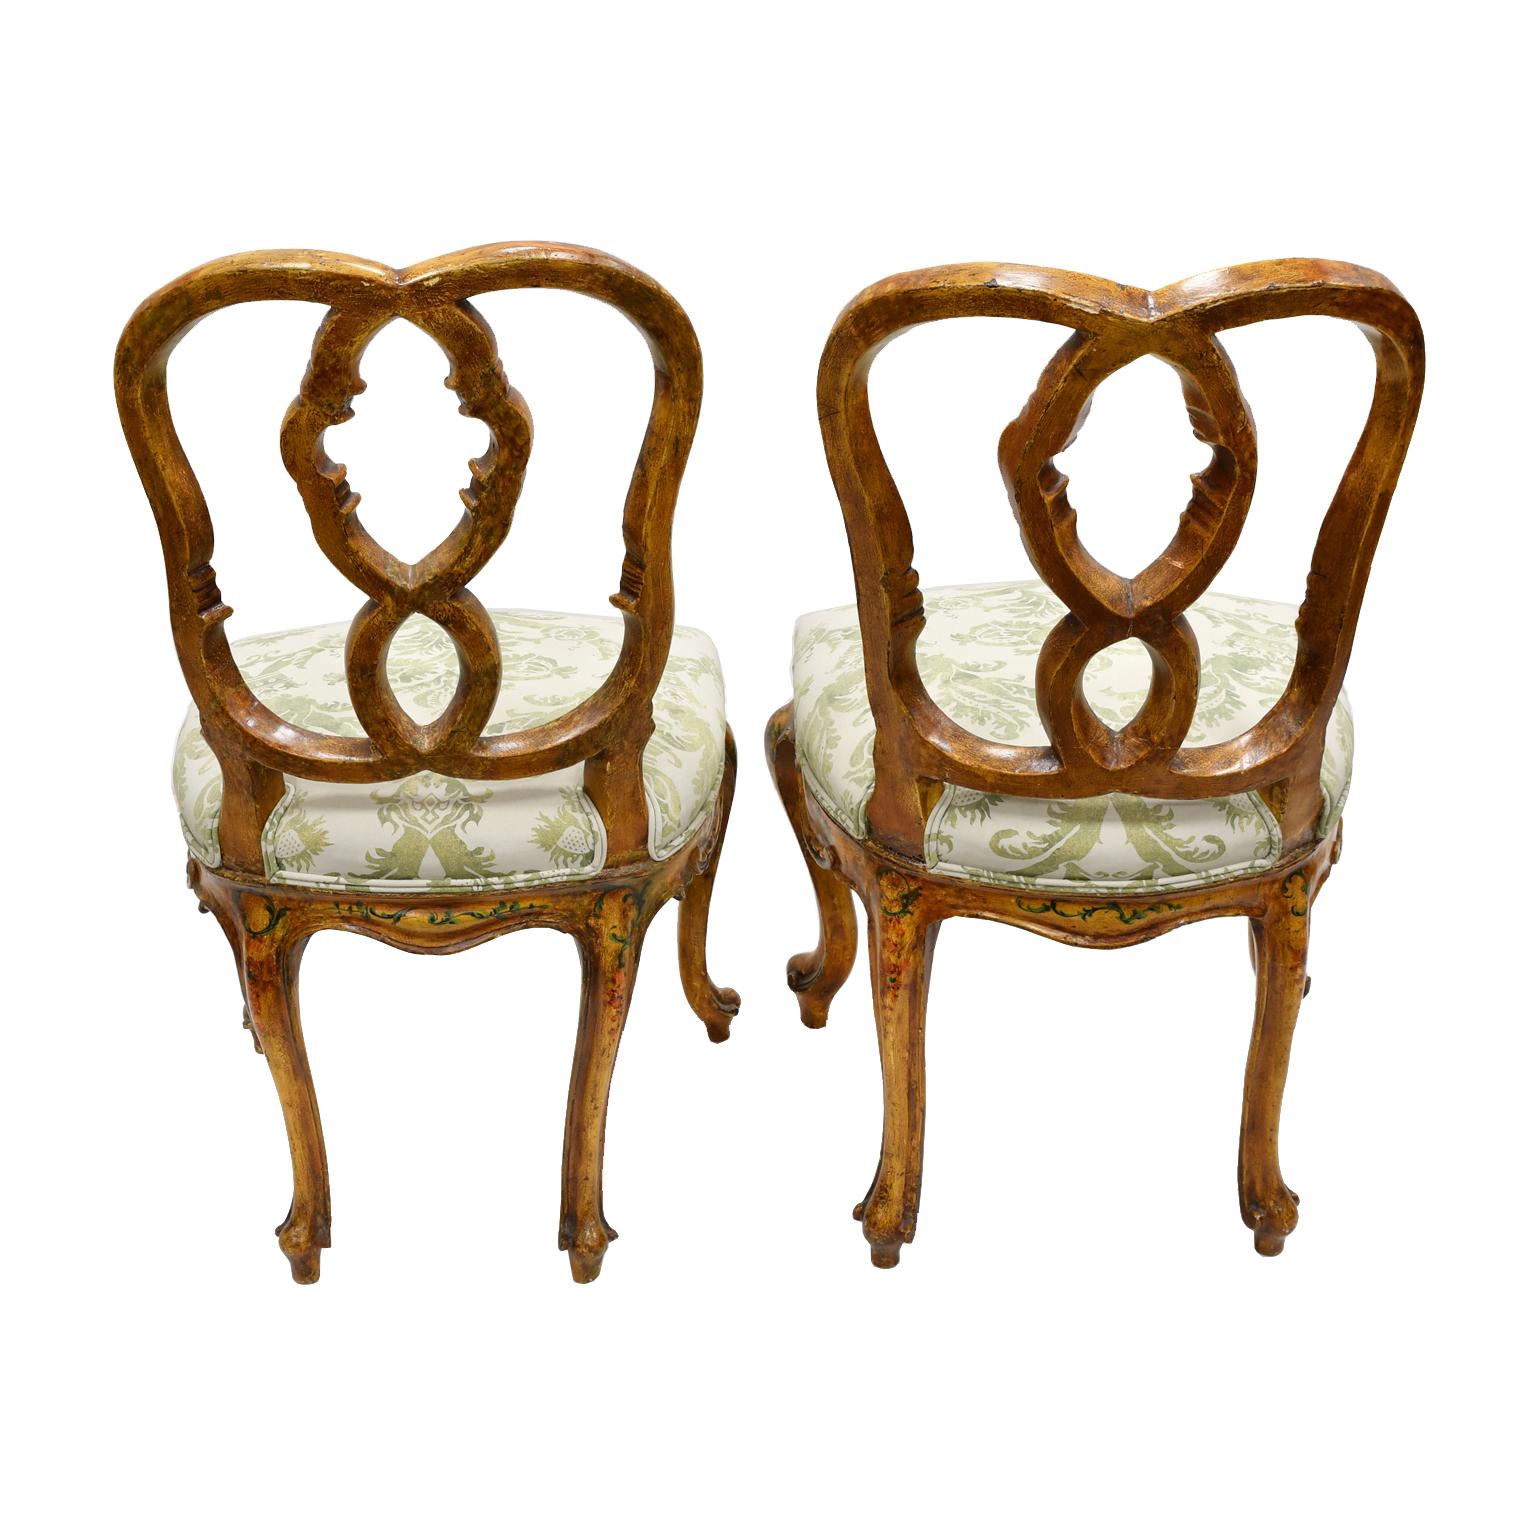 Hand-Carved Pair of Antique Venetian Dining Chairs in Yellow Paint with Flowers & Upholstery